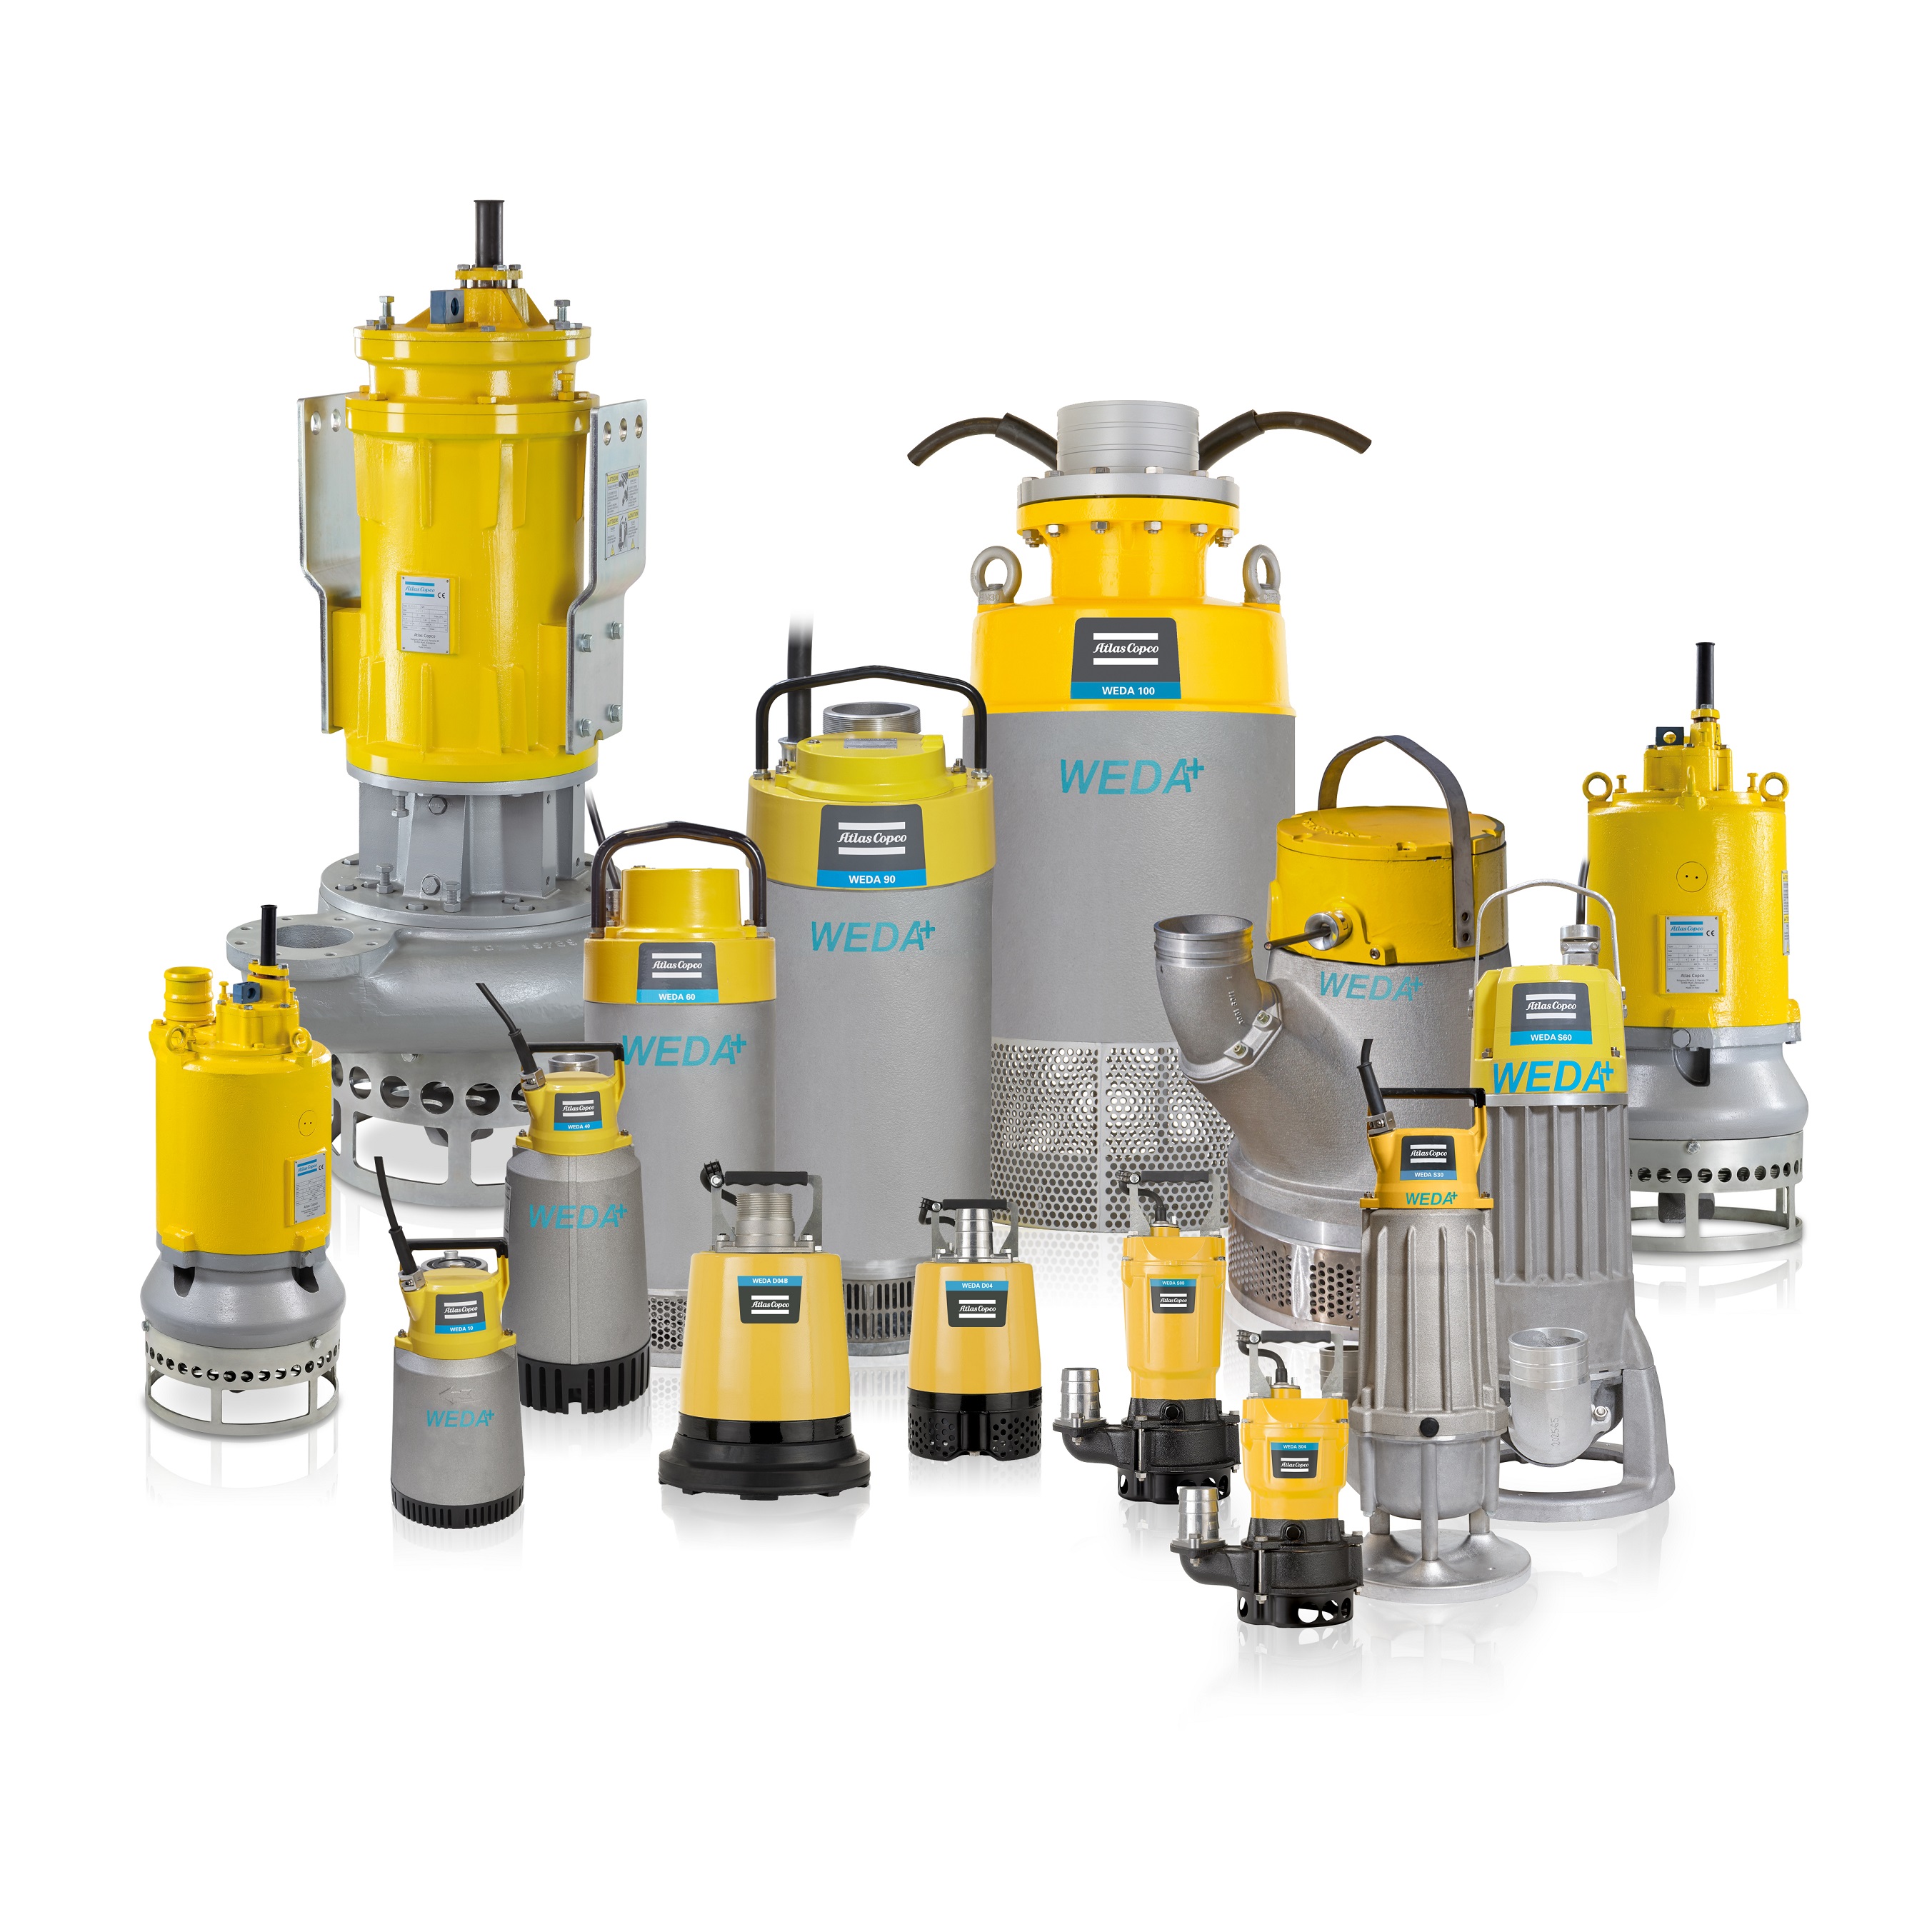 Atlas Copco's WEDA range now includes the expanded WEDA D for dewatering, the WEDA S for sludge and the completely new WEDA L slurry family.